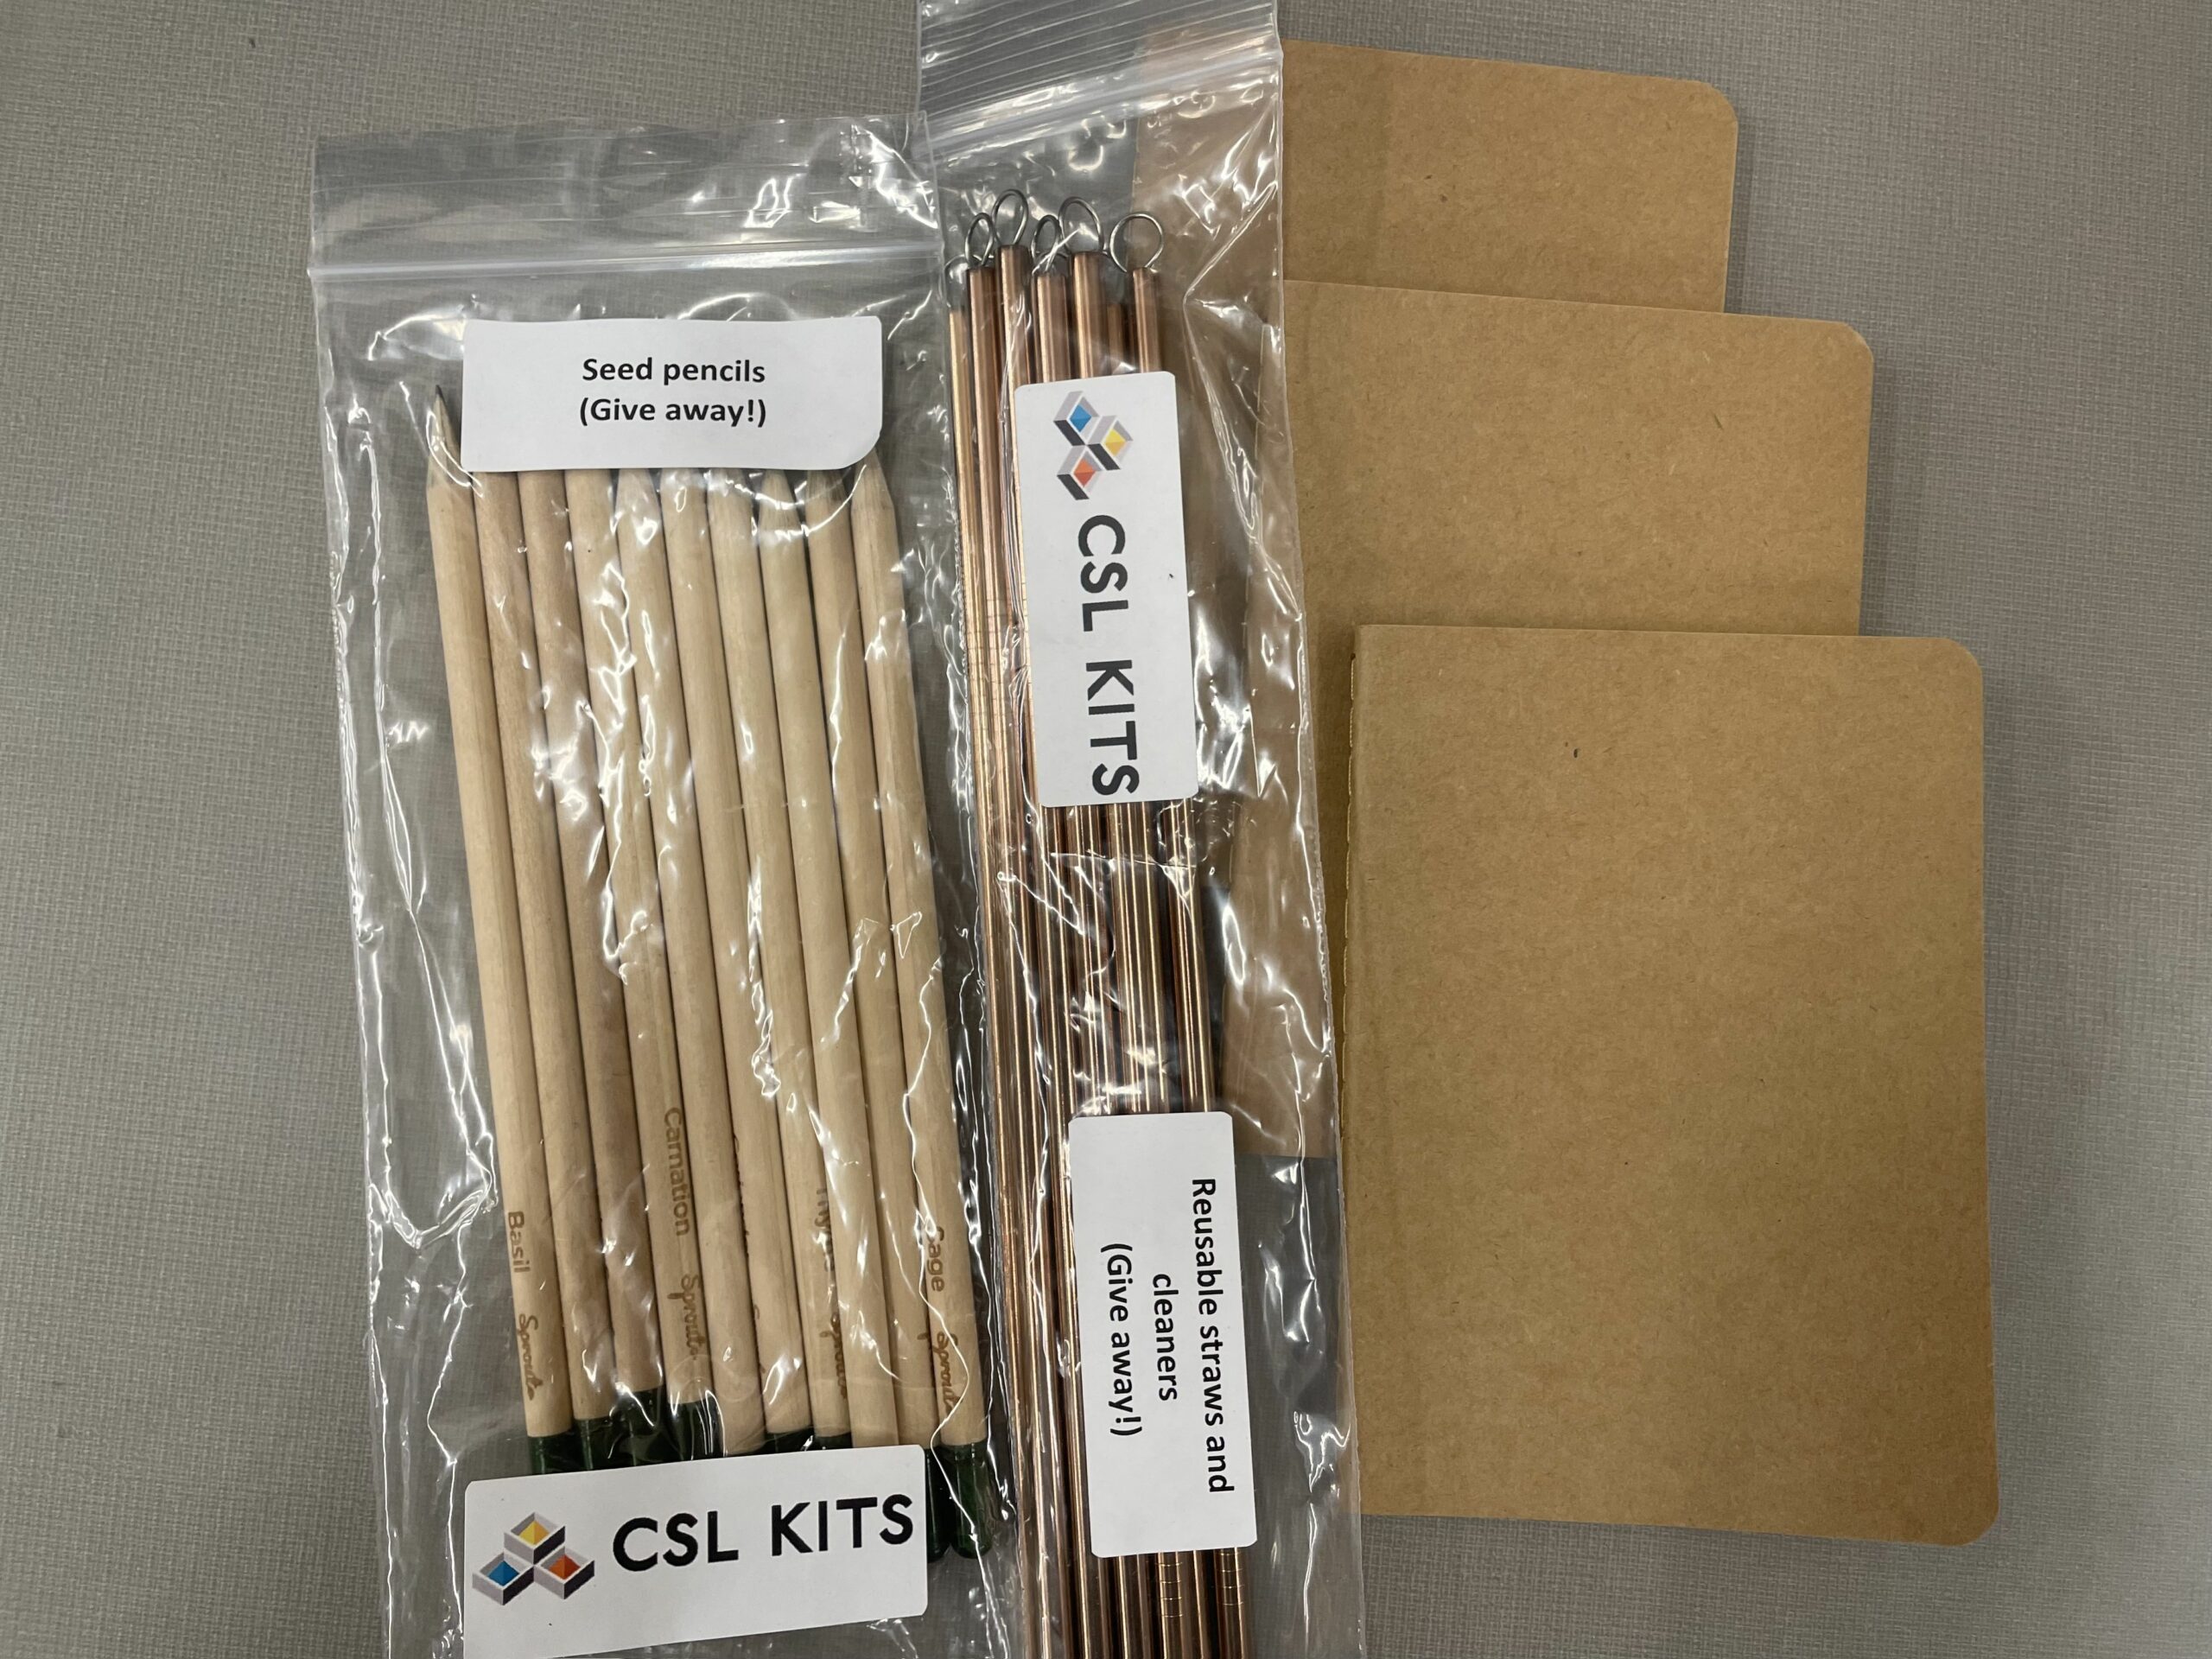 Climate Kit Giveaways